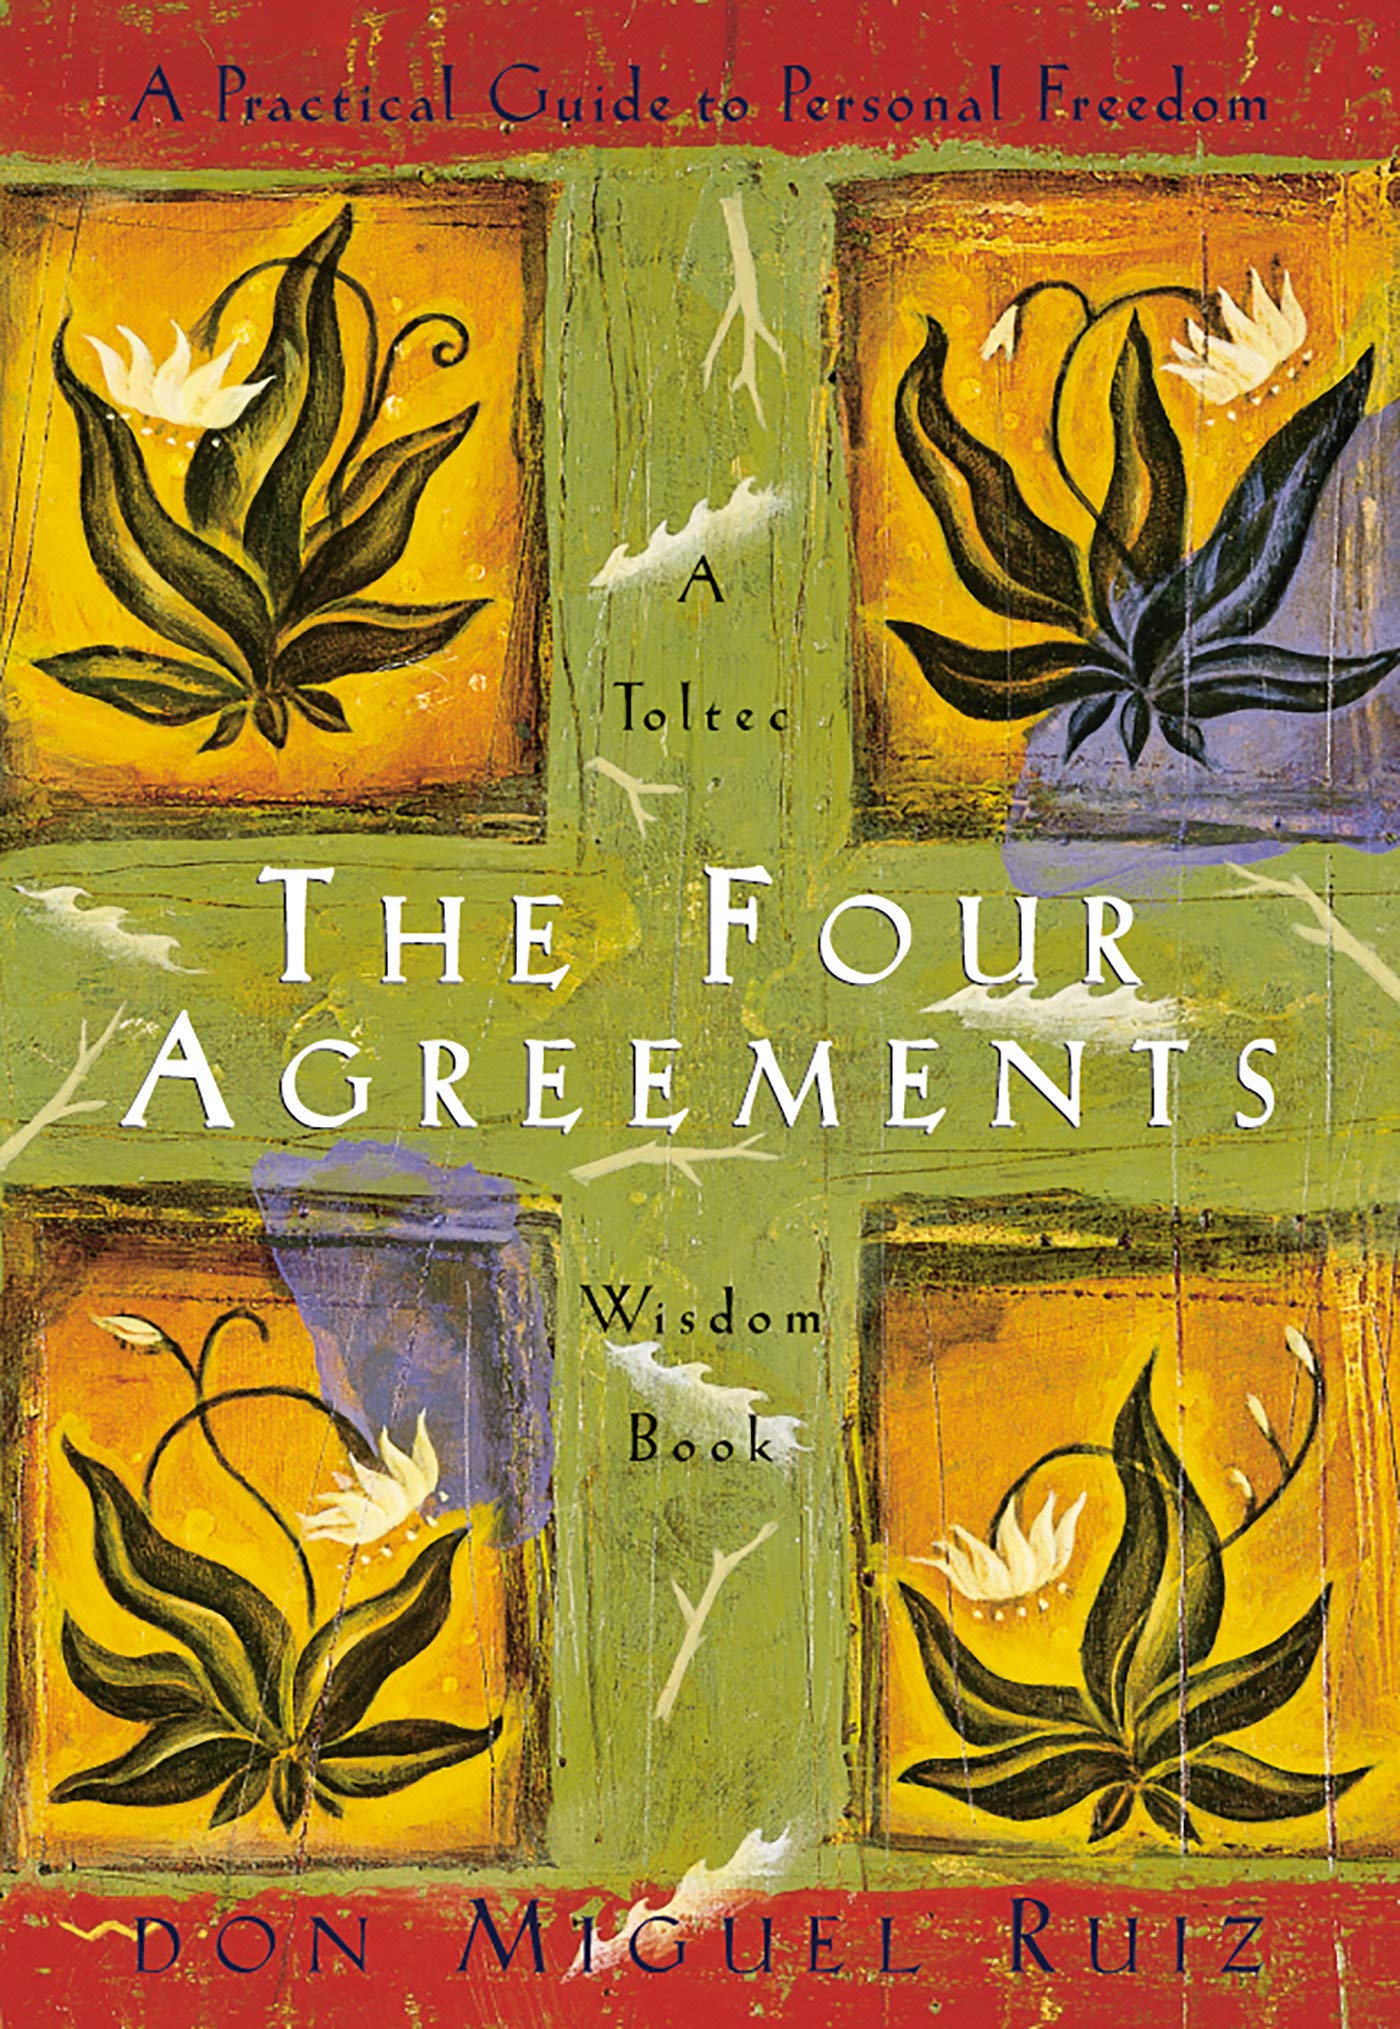 #2. The Four Agreements, Don Miguel Ruiz